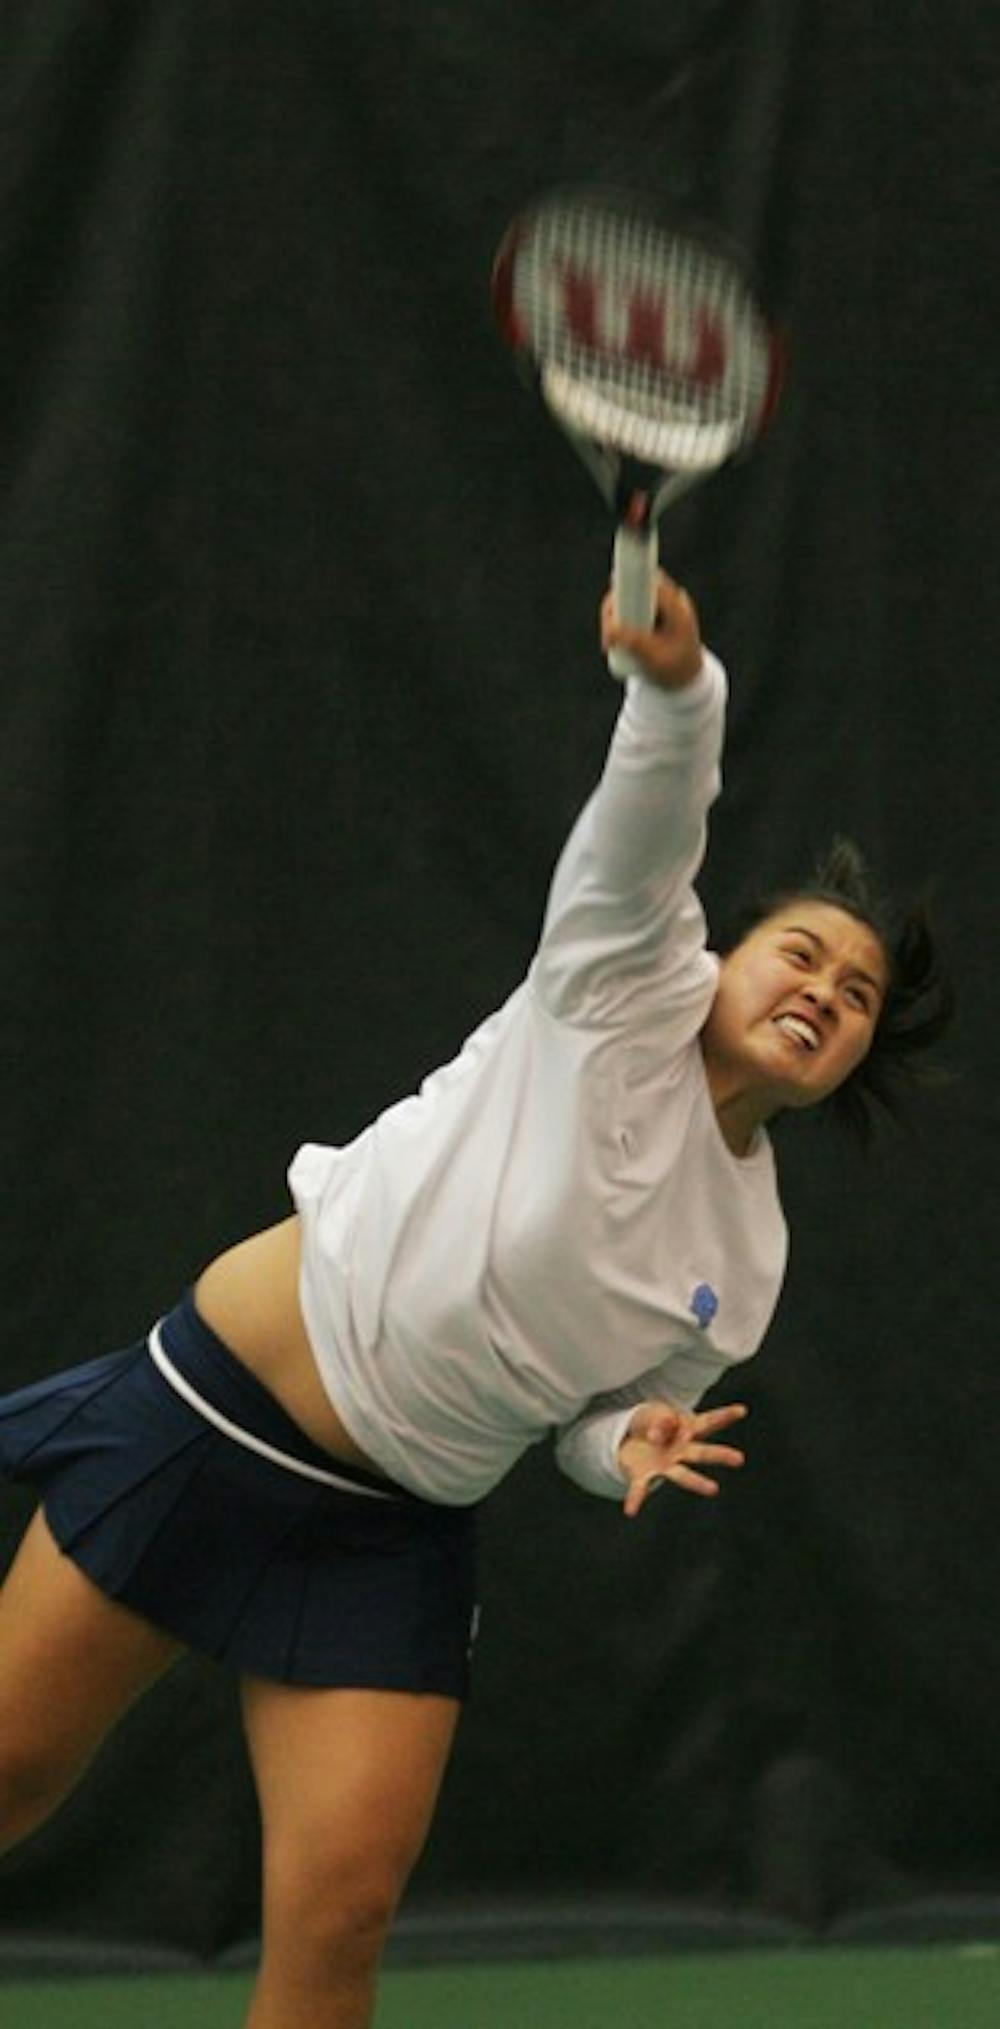 Katrina Tsang came away with a win in her singles match against N.C. State. DTH/Andrew Dunn